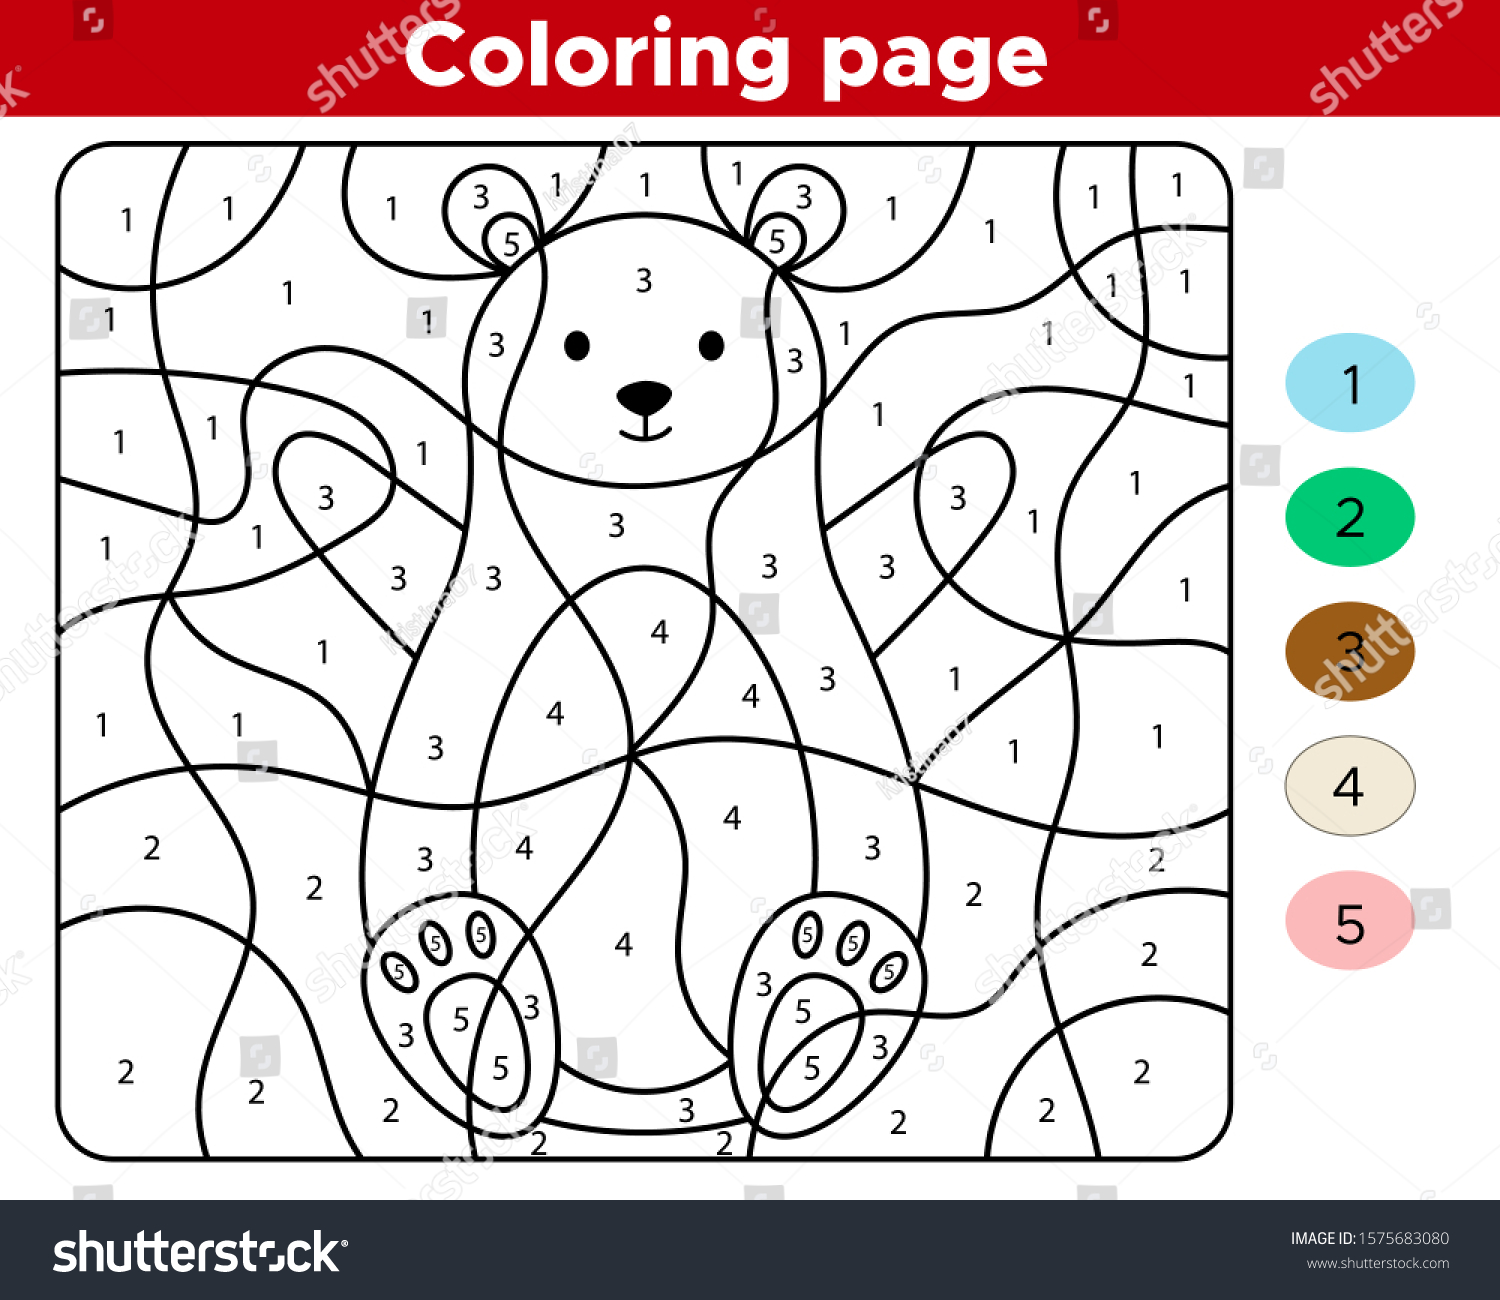 Coloring page children learn numbers preschoolers stock vector royalty free